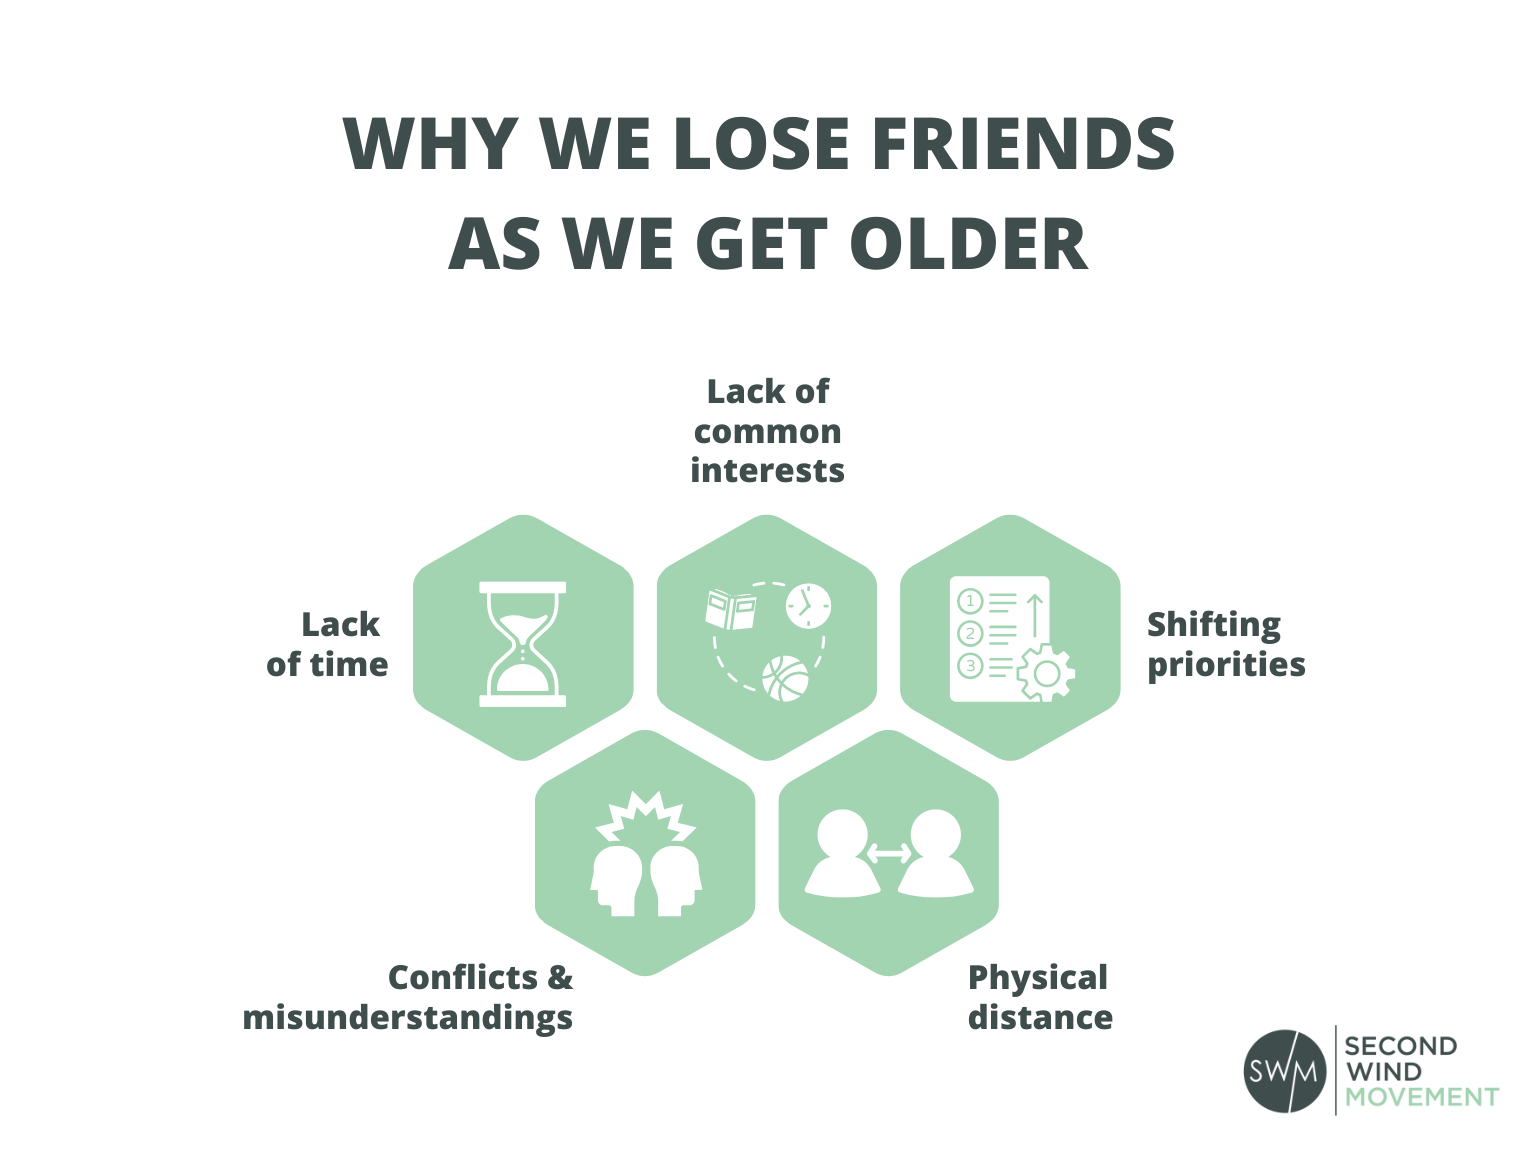 why we lose friends as we get older: lack of time, lack of common interests, shifting priorities, conflicts & misunderstandings, physical distance